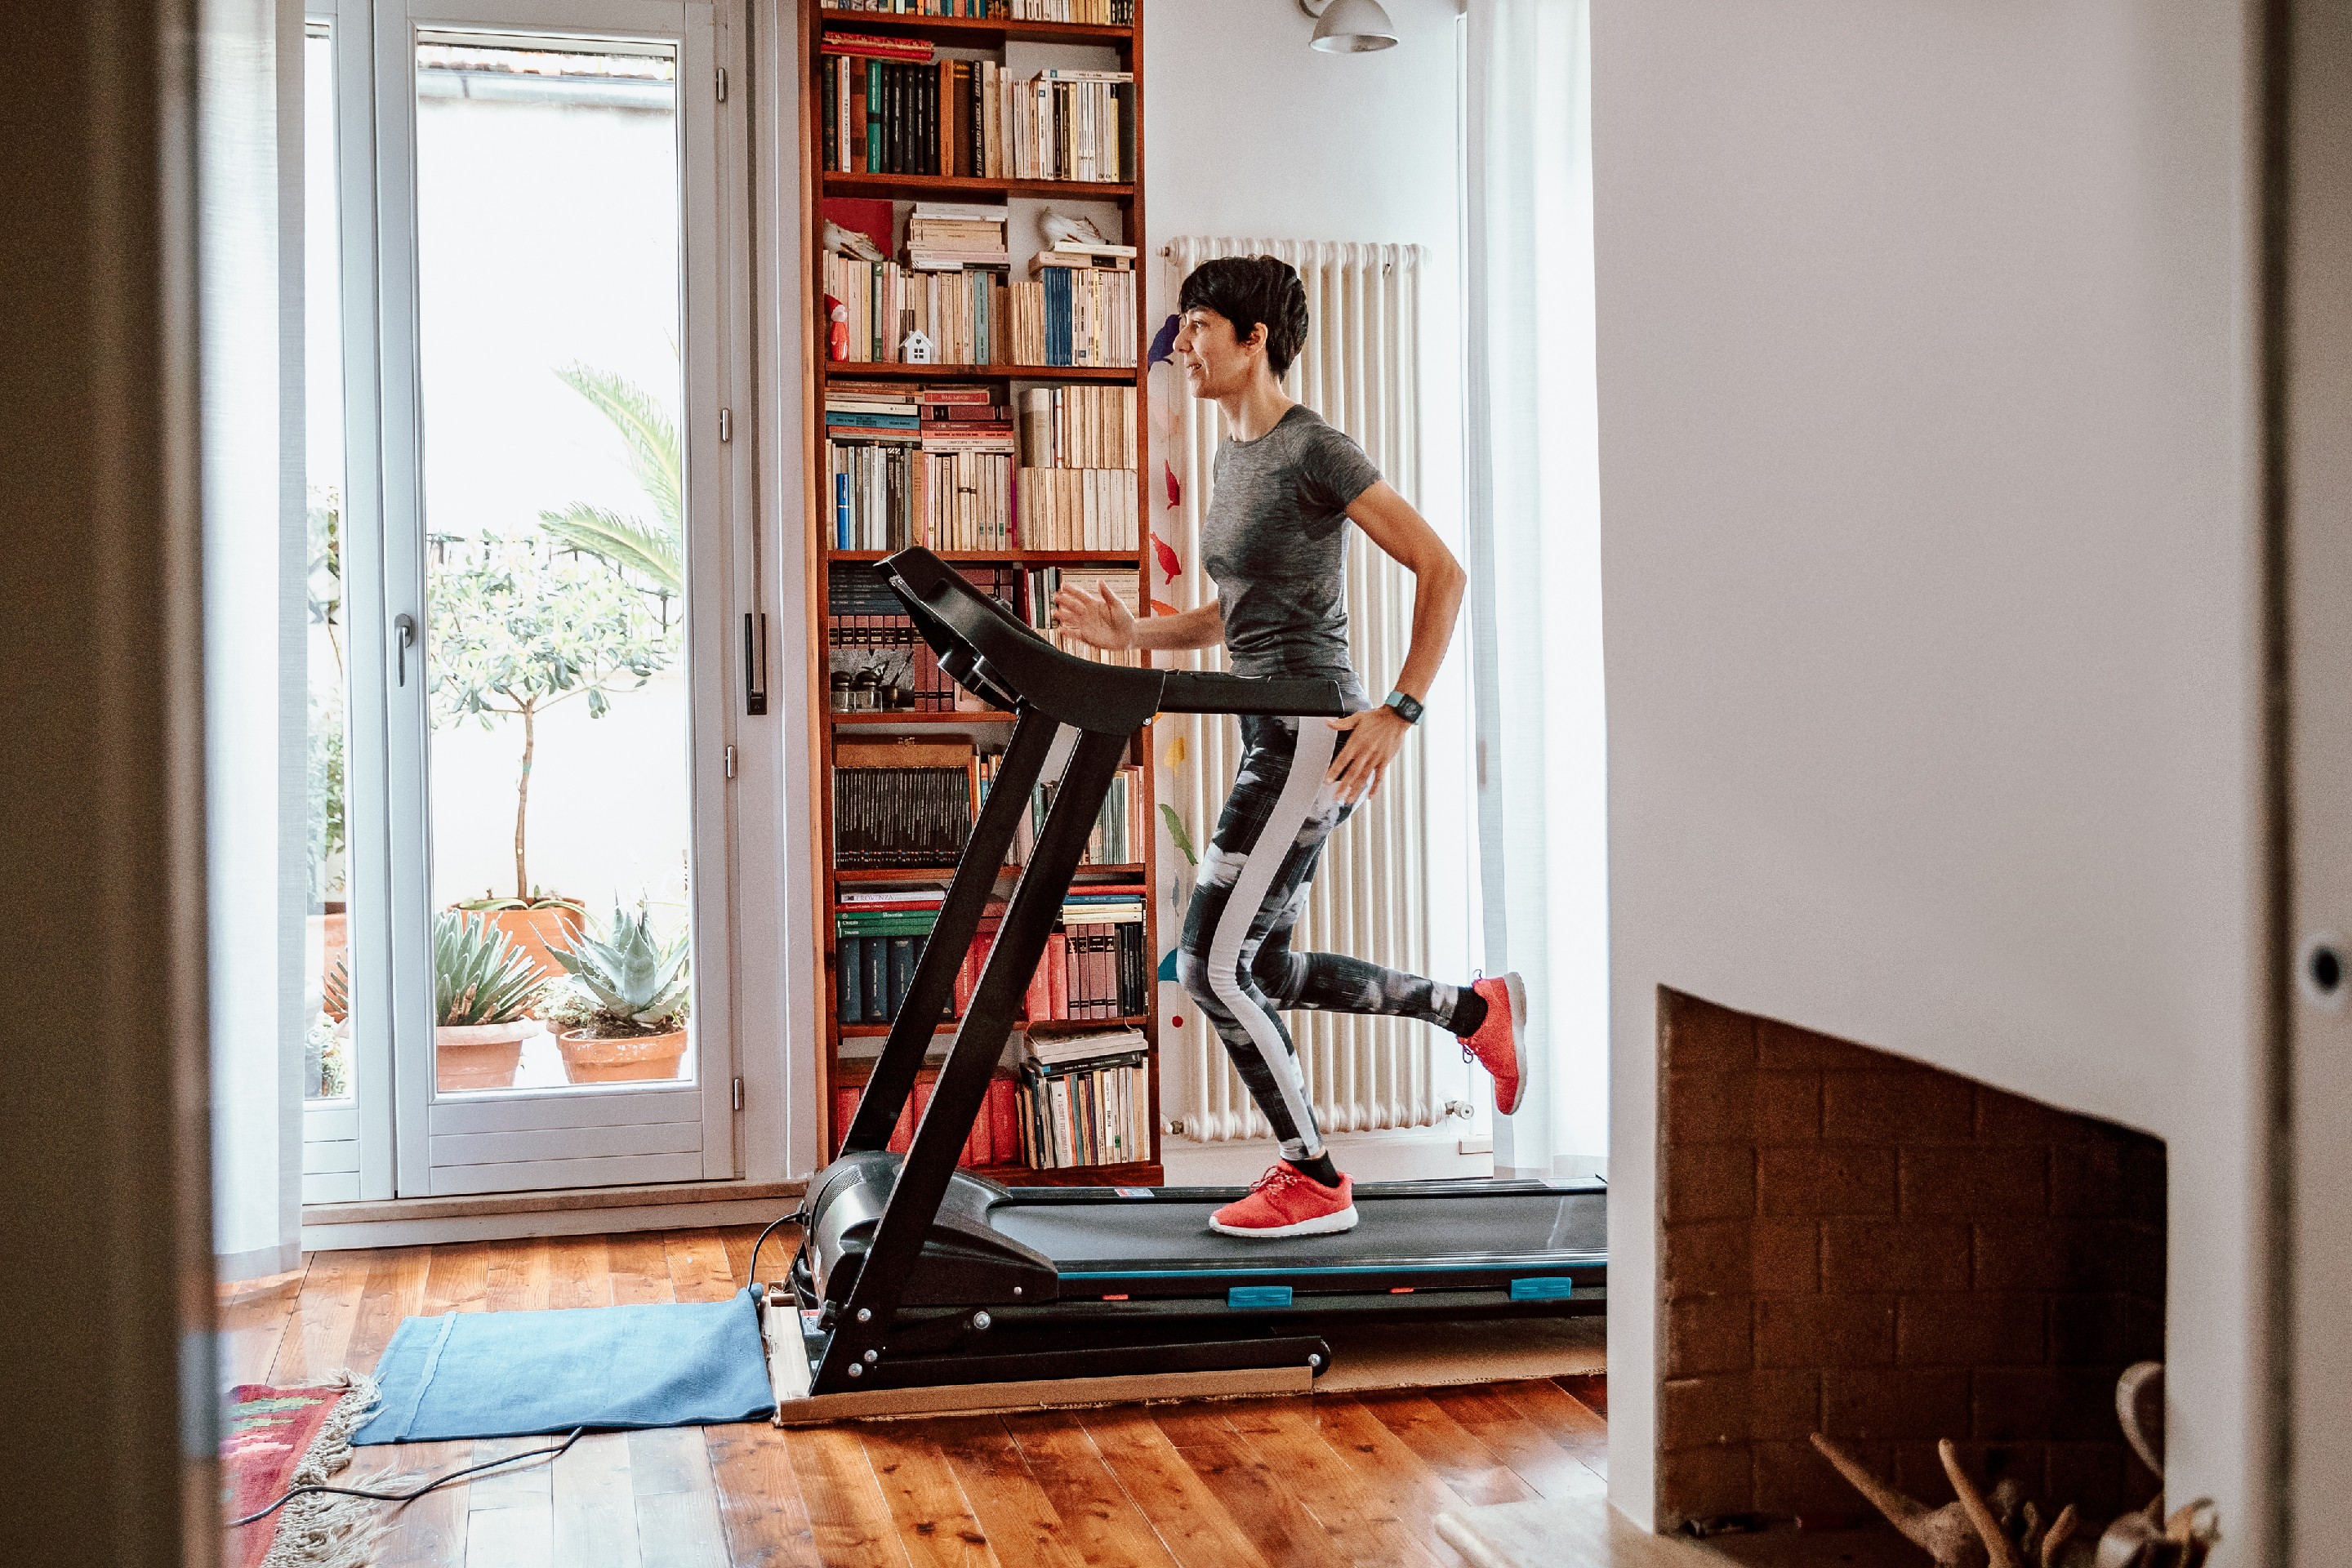 How To Lubricate a Treadmill So It Lasts Longer